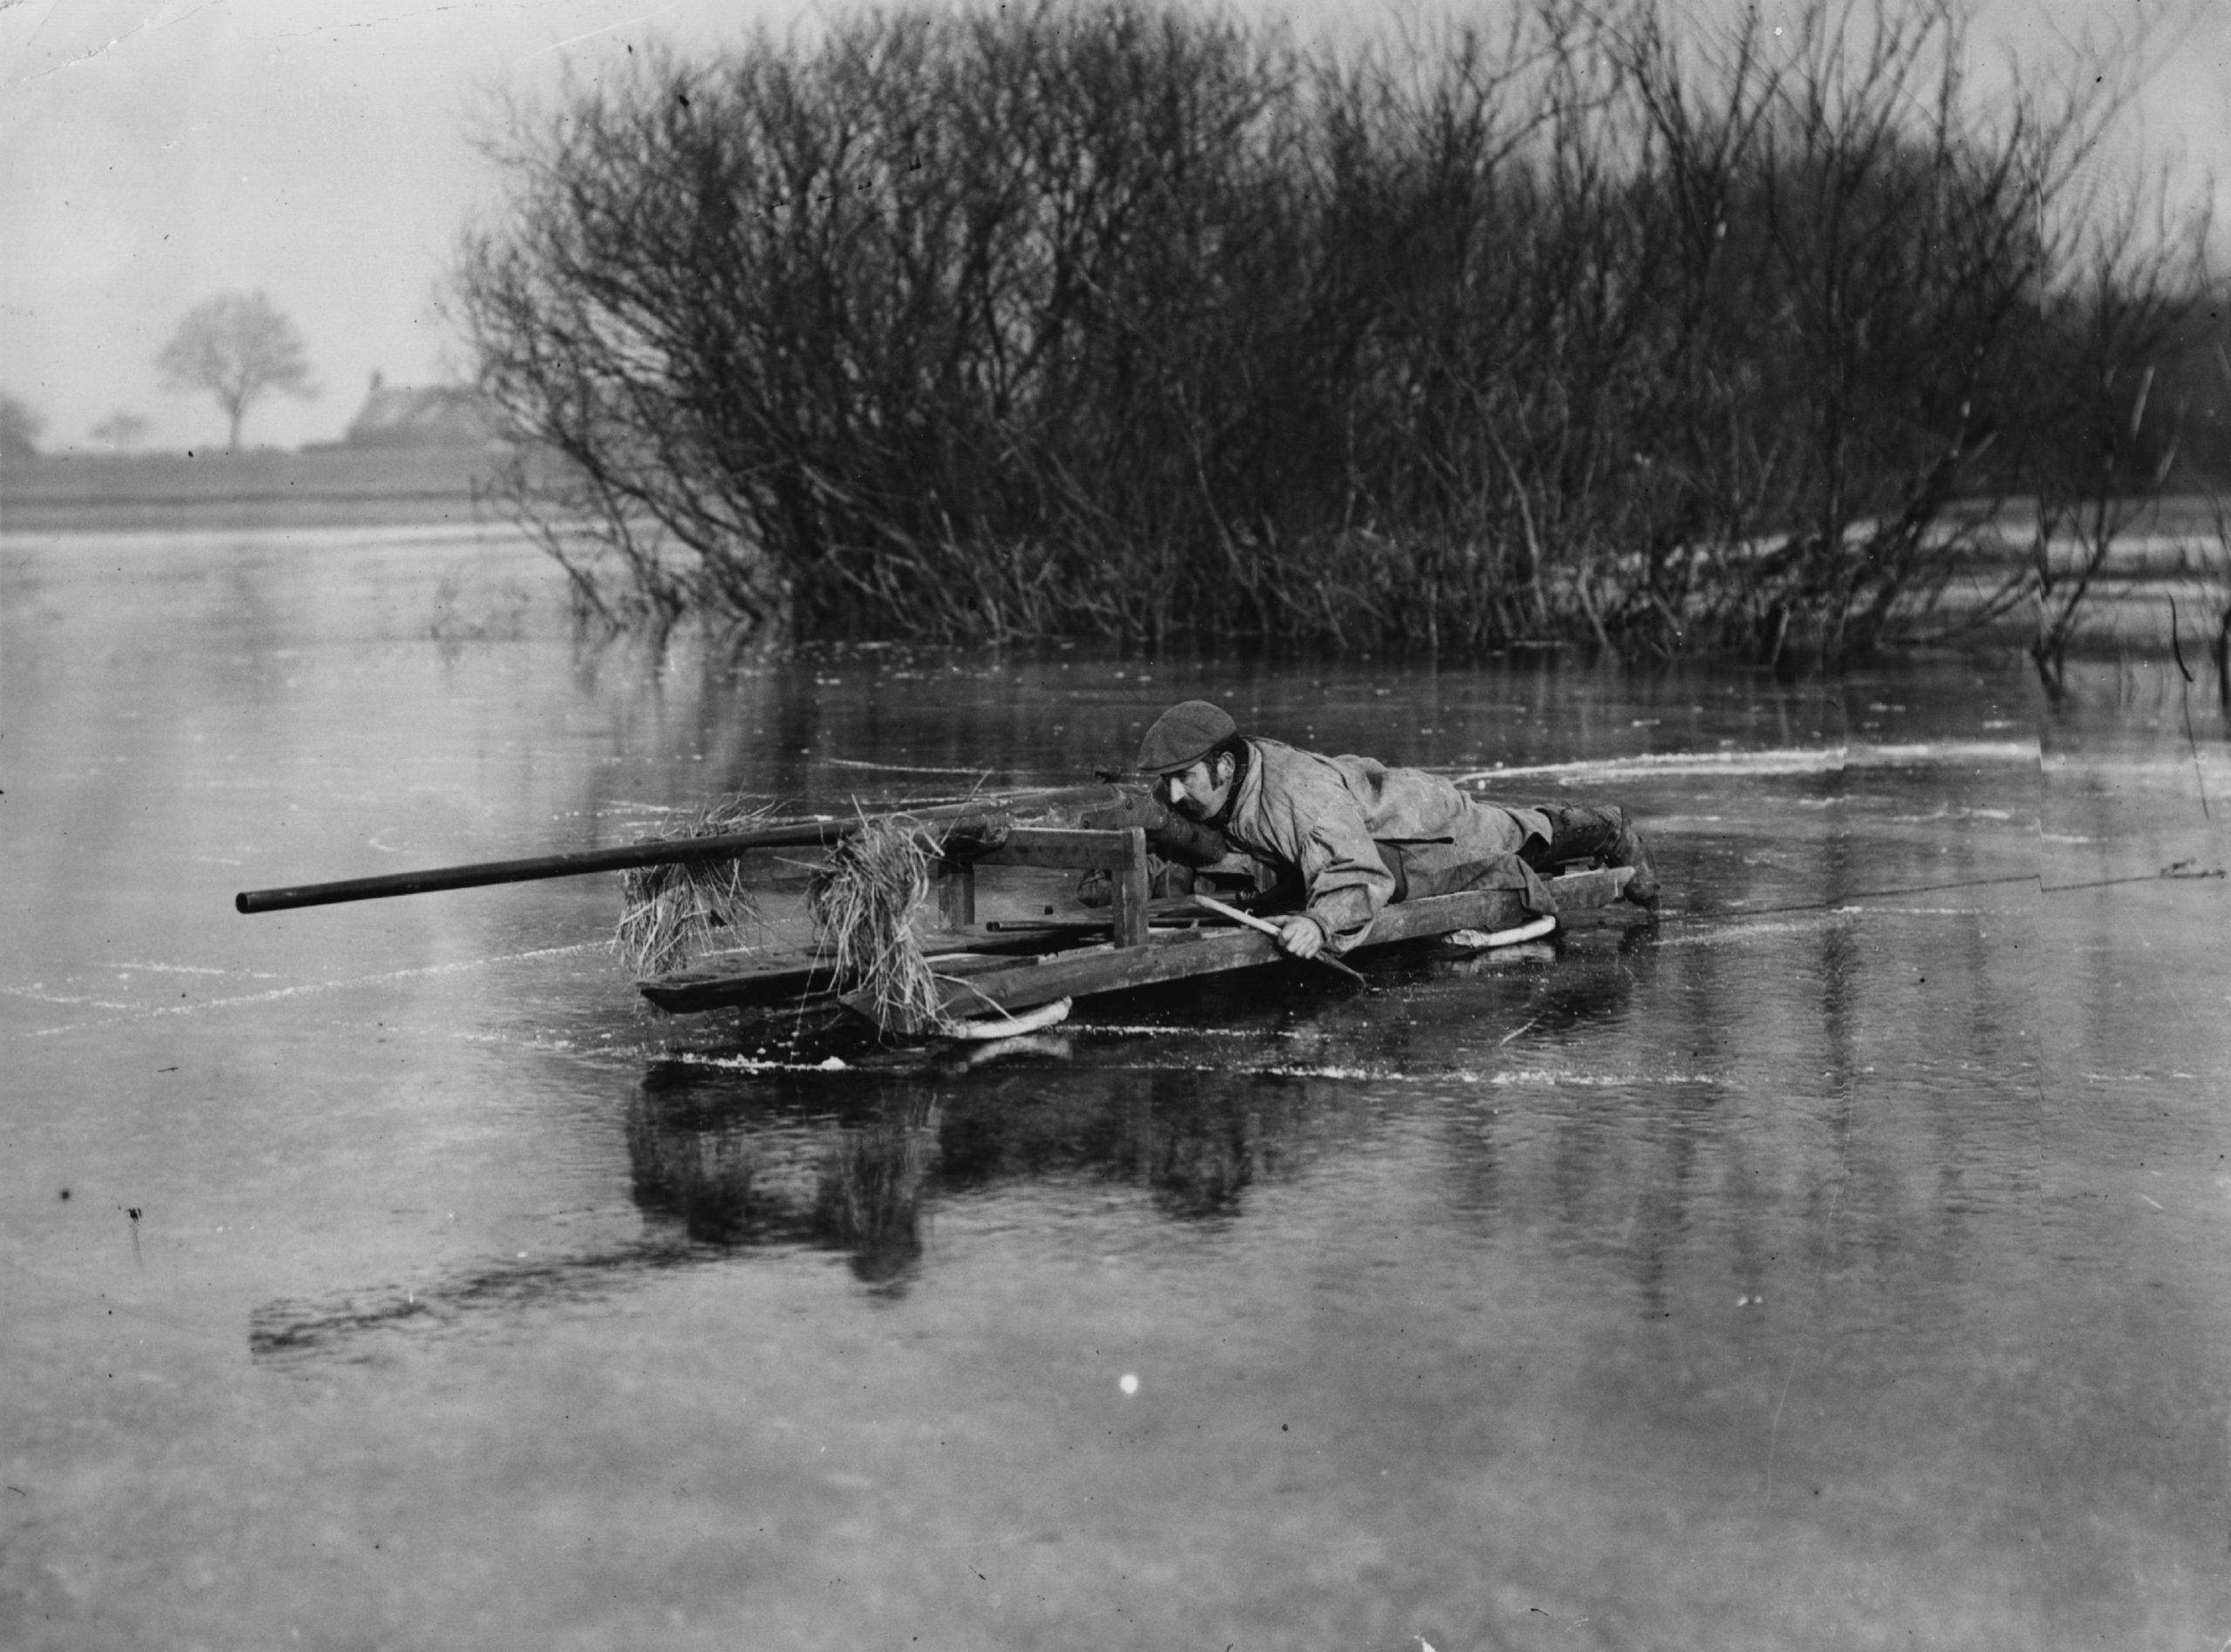 A duckshooter stalking birds on a sledge with a punt gun, on the frozen waters of Crowbit Wash in the Fens. (Photo by Topical Press Agency/Getty Images)